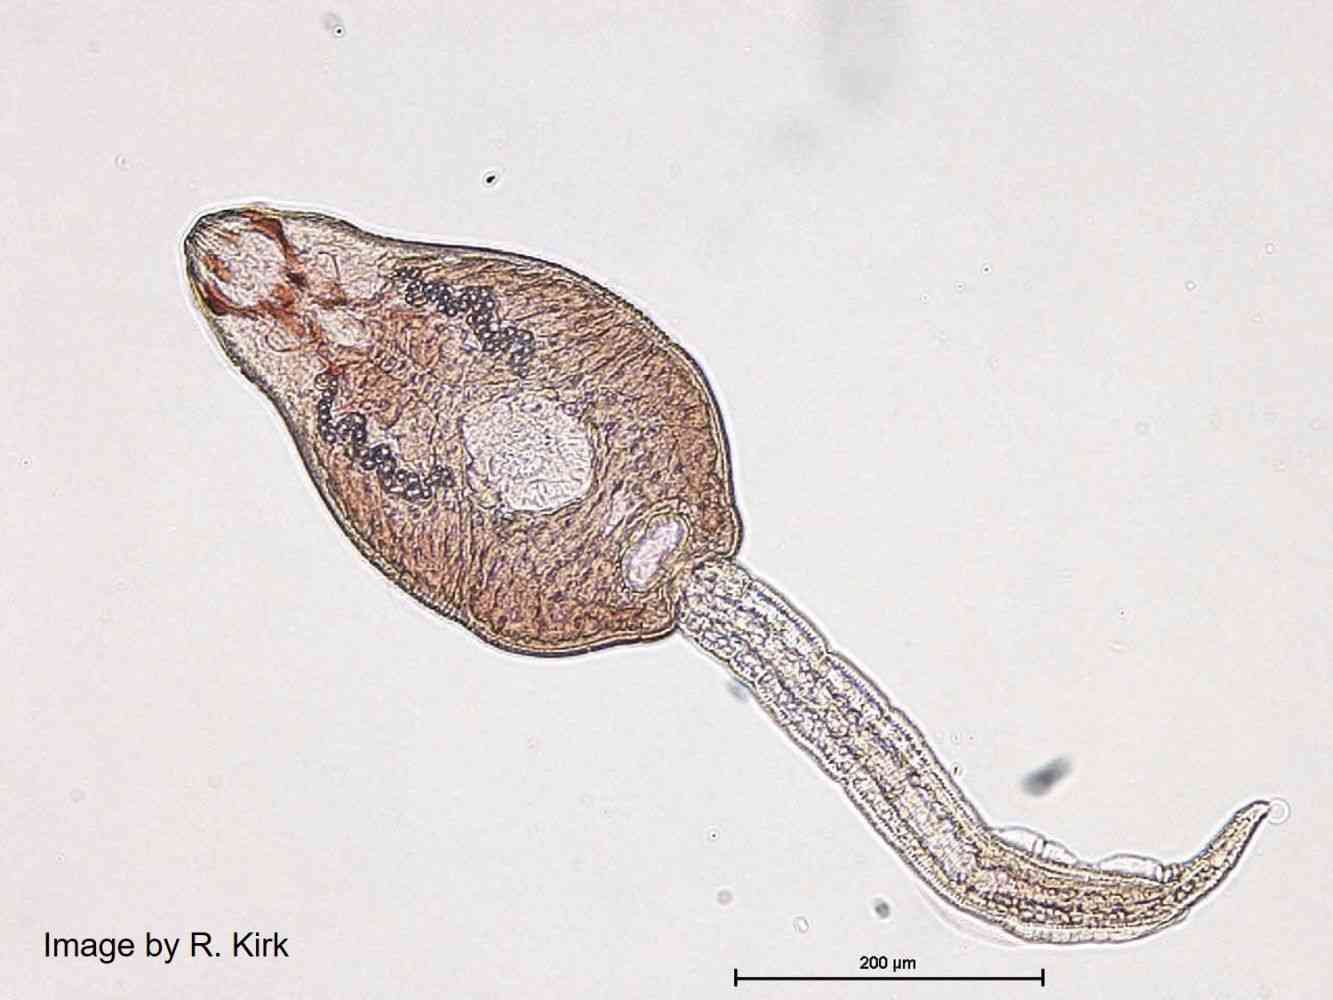 Cercaria of Echinostoma revolutum, an echinostome parasite - Echinostoma revolutum is distributed worldwide, but only causes disease when raw or undercooked second intermediate hosts (e.g. fish, molluscs, frogs) are traditionally eaten as in E and SE Asia.